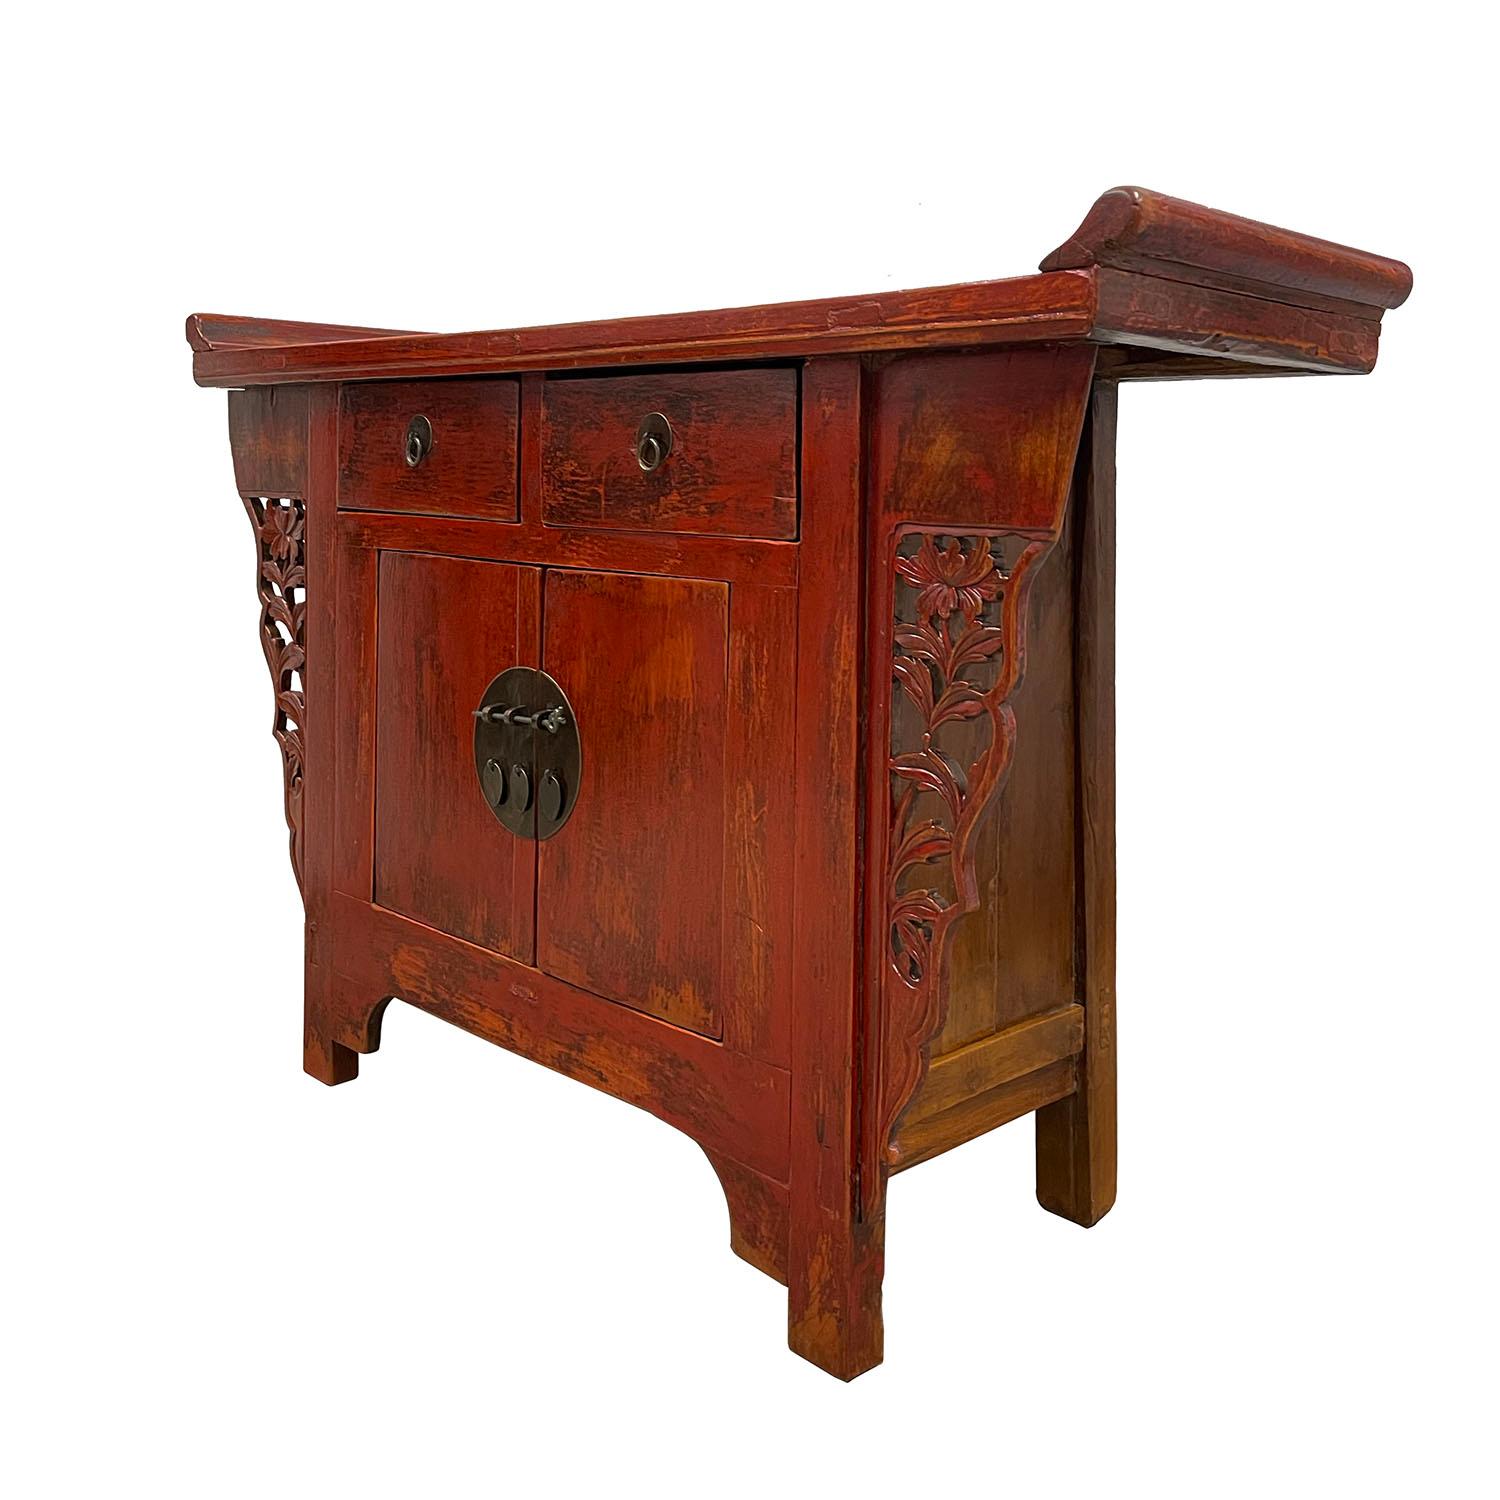 This beautiful antique console table, sideboard has beautiful traditional Ming style simple plain design on the front with red lacquer finish. There are some hand carving works of floral design on the sides. This table features two drawers and one